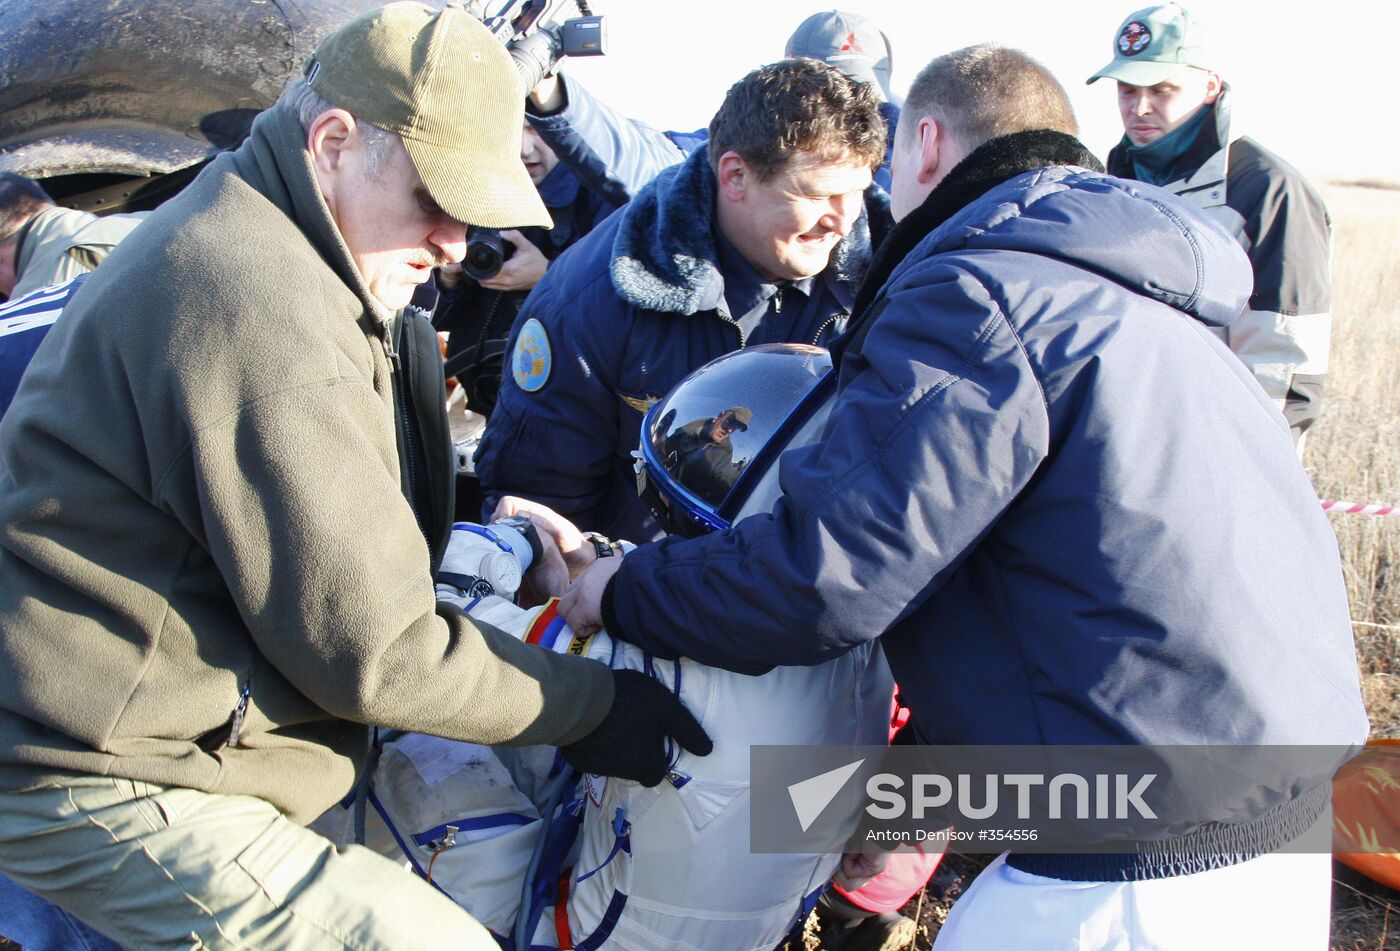 17th ISS expedition returns to Earth